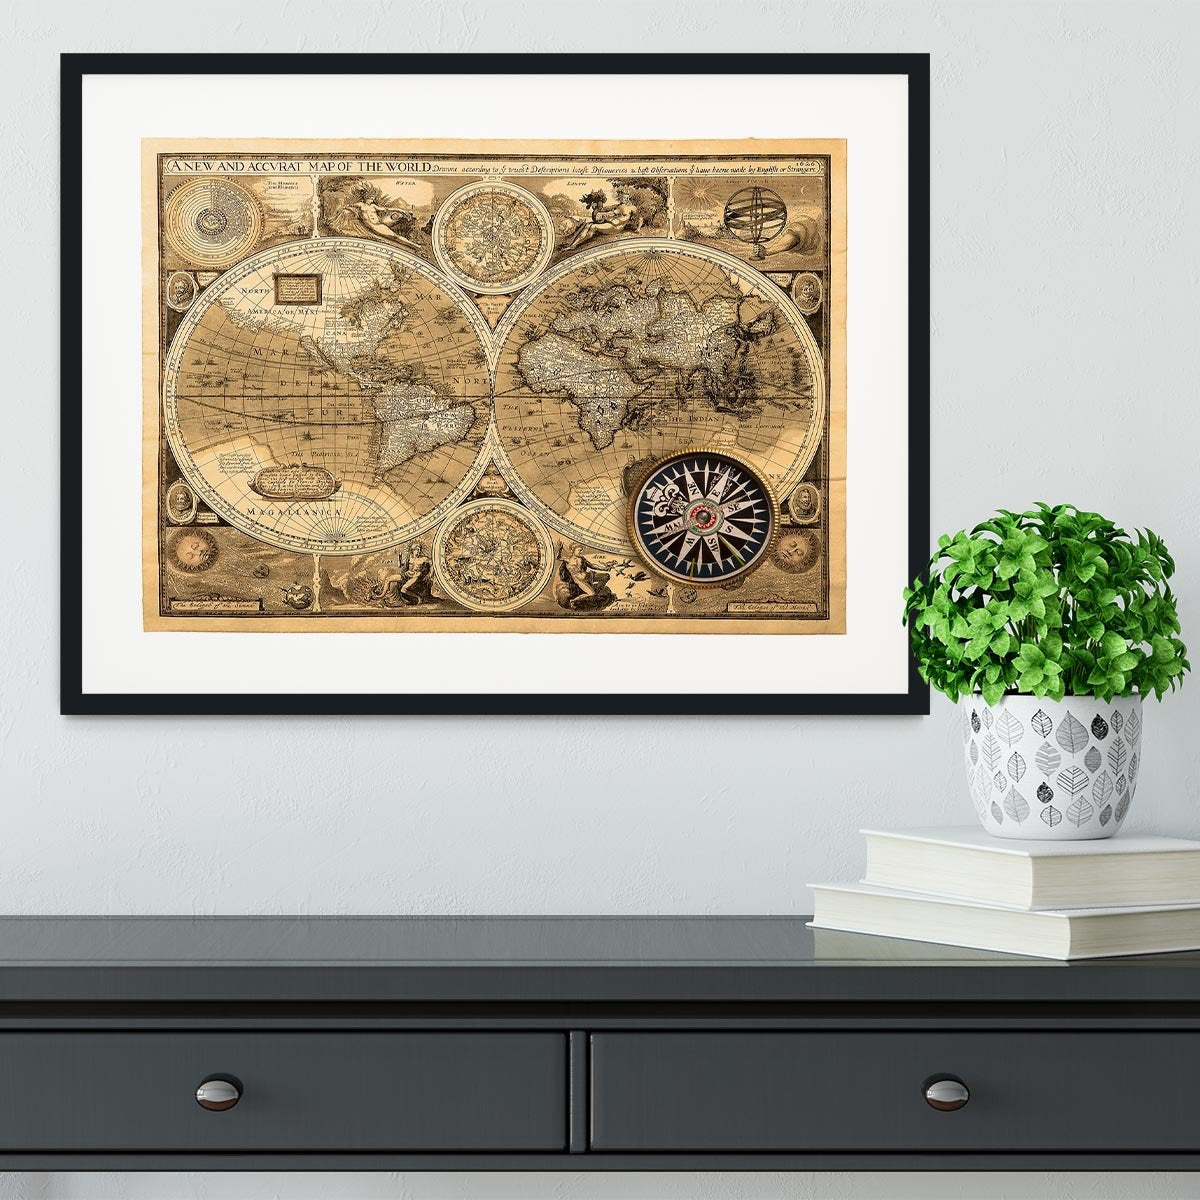 A new and accvrat map of the world Framed Print - Canvas Art Rocks - 1